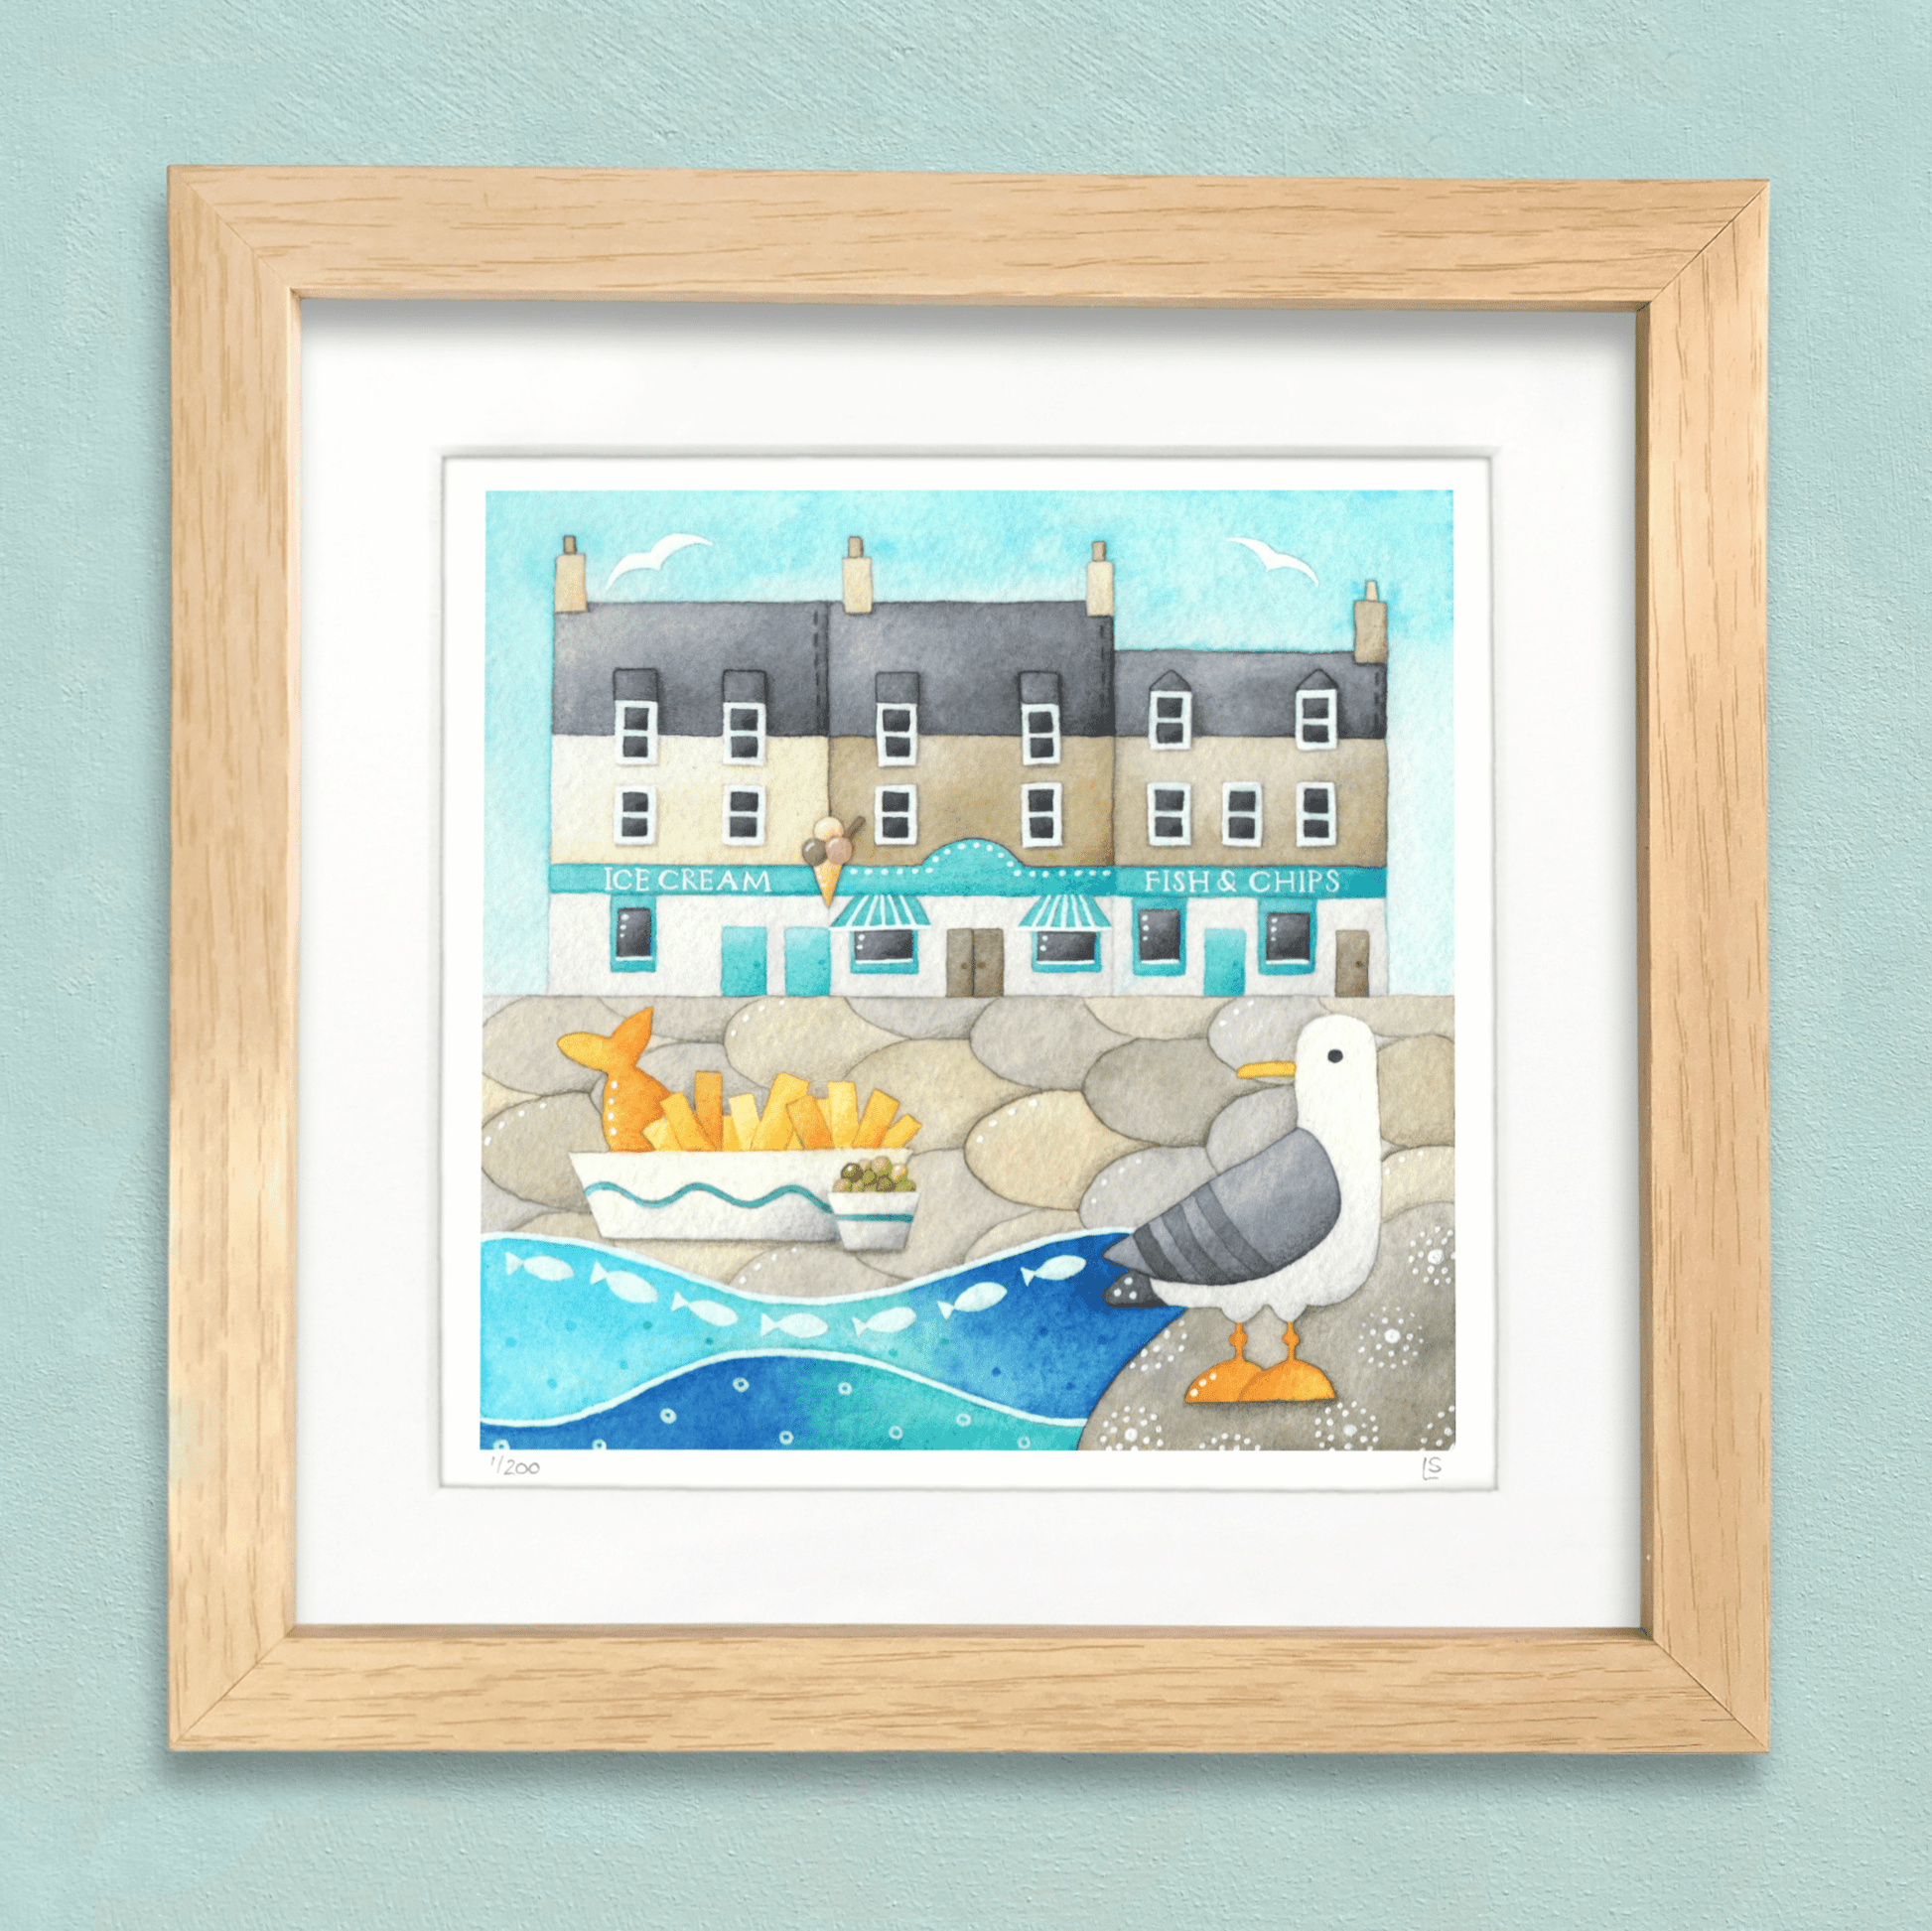 Fish and Chips at Anstruther - Seagull Seaside Watercolour Painting - Limited Edition Signed Print - East Neuk Beach Crafts